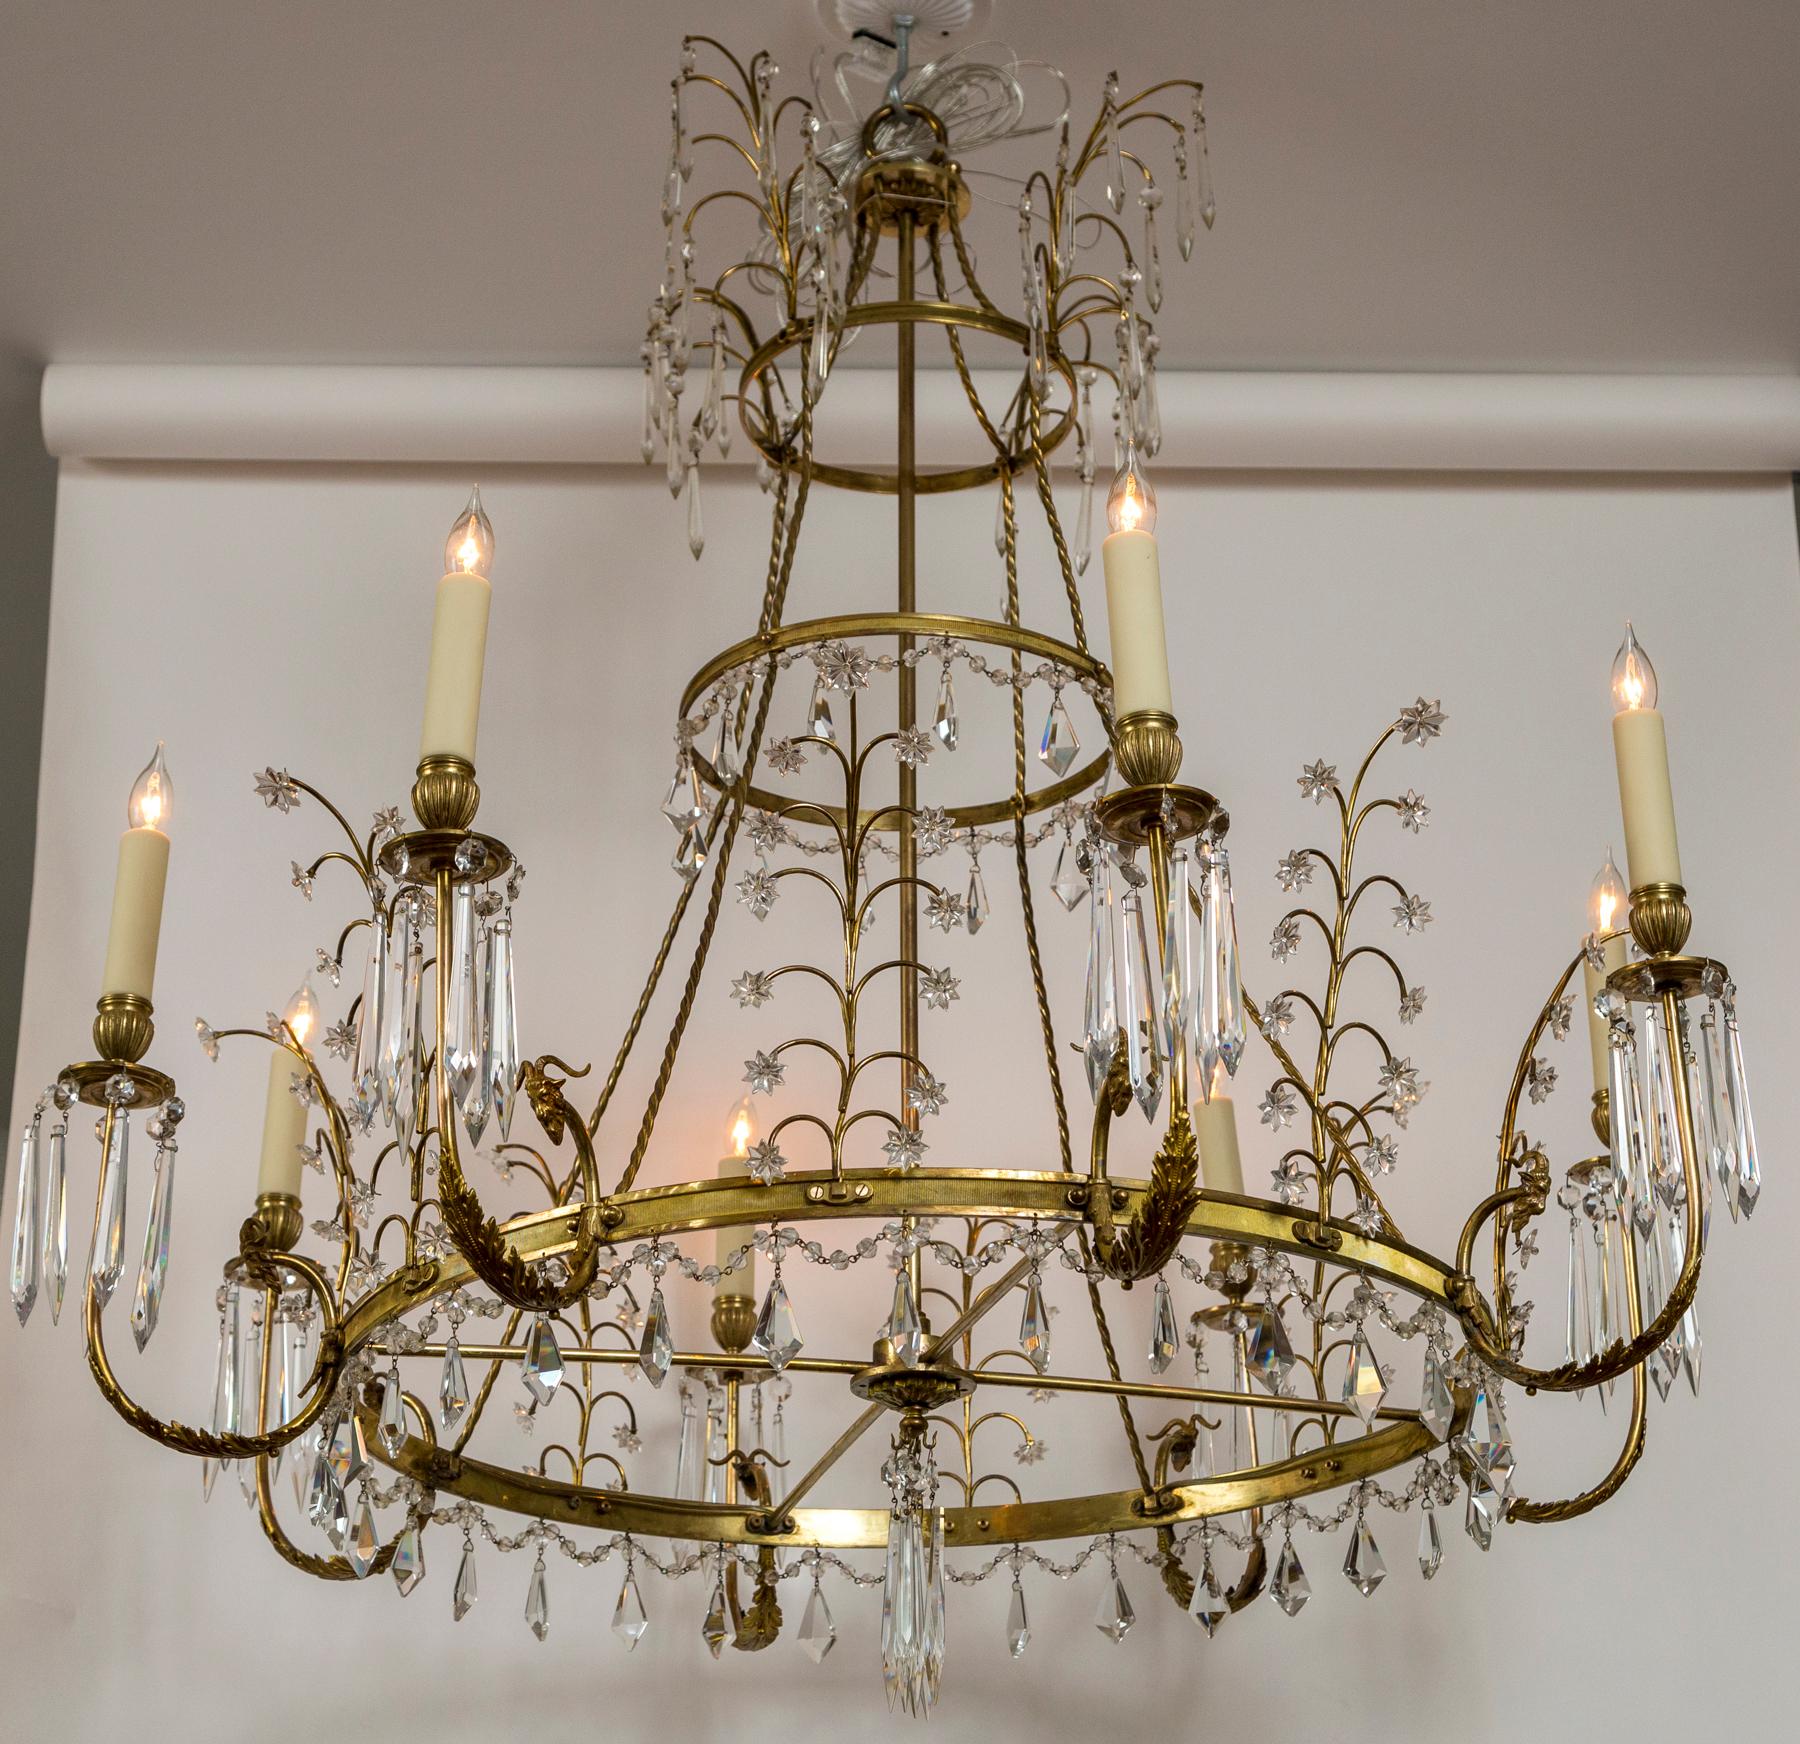 Early 20th Century Baltic Russian Neoclassical Brass and Crystal Chandelier For Sale 7